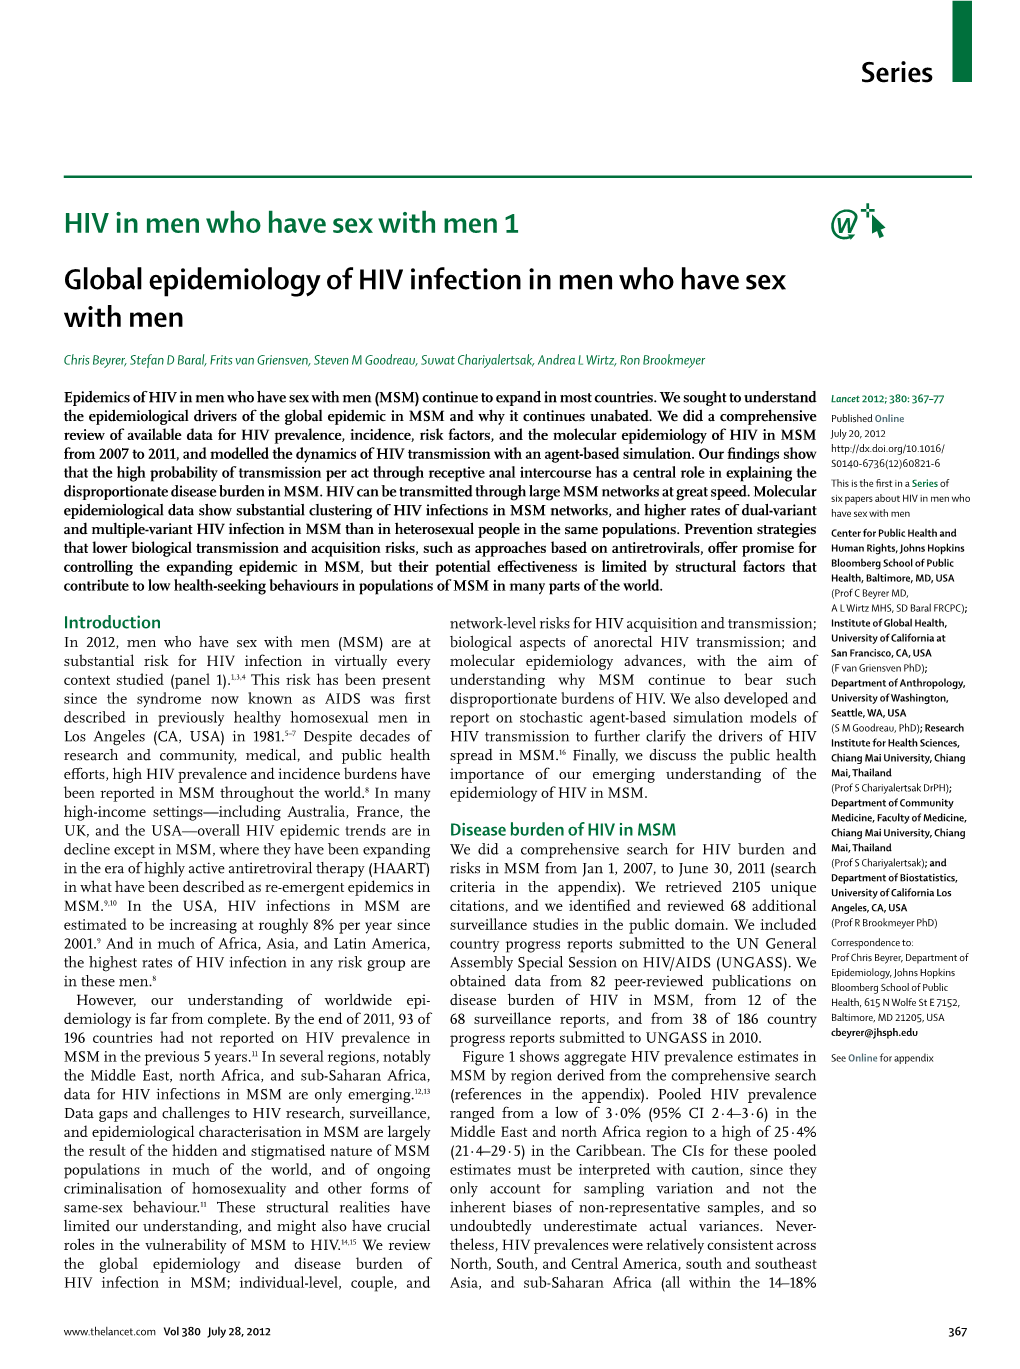 Global Epidemiology of HIV Infection in Men Who Have Sex with Men